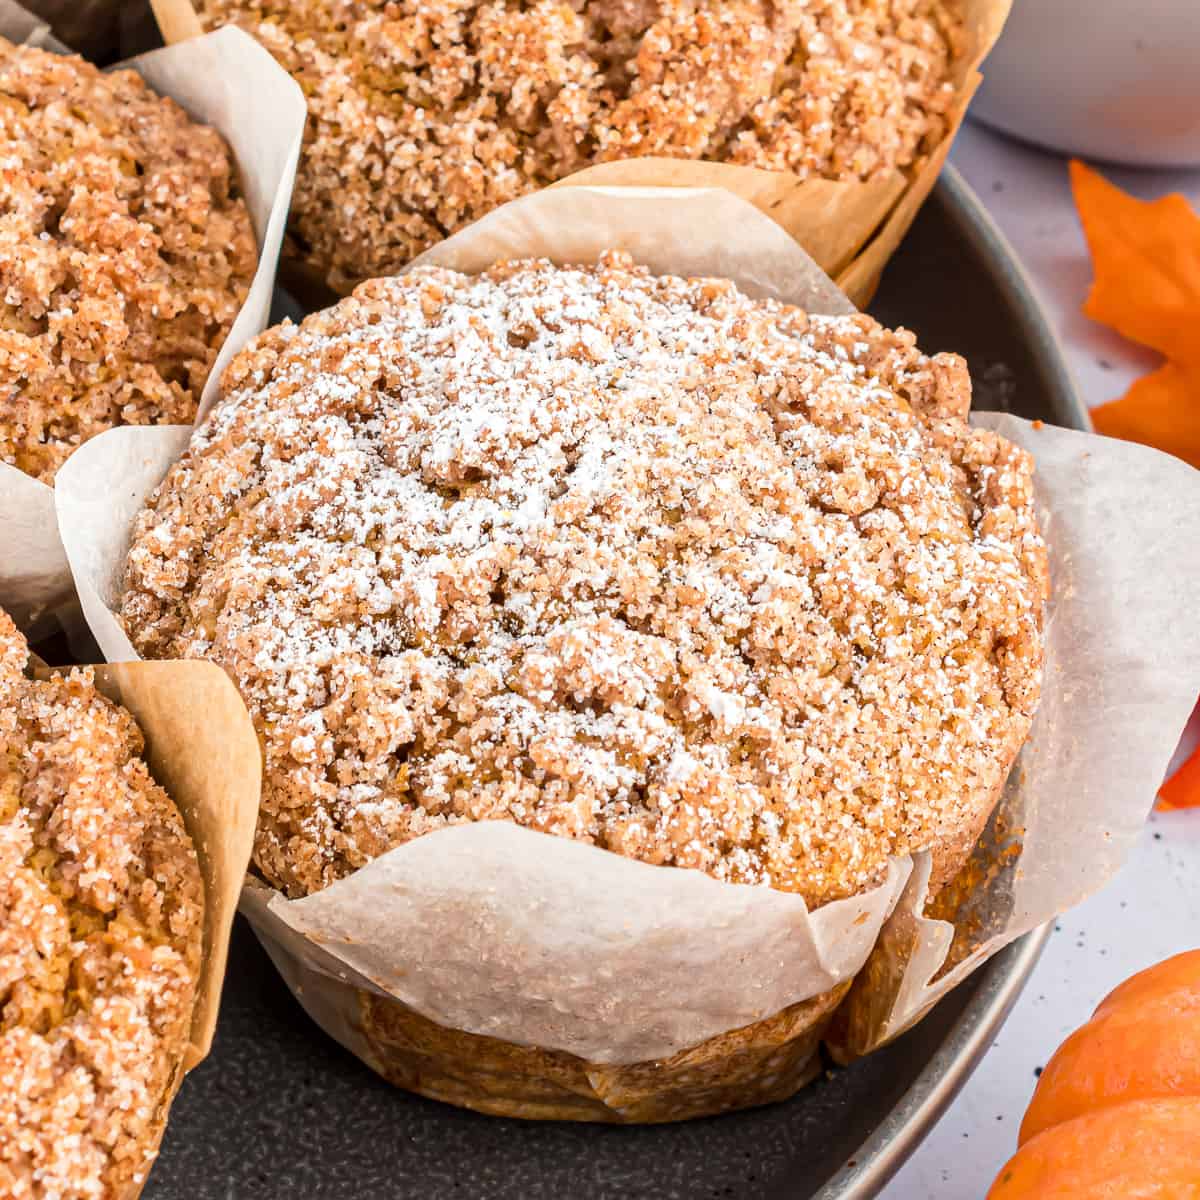 Close up view of a pumpkin muffin with streusel topping.